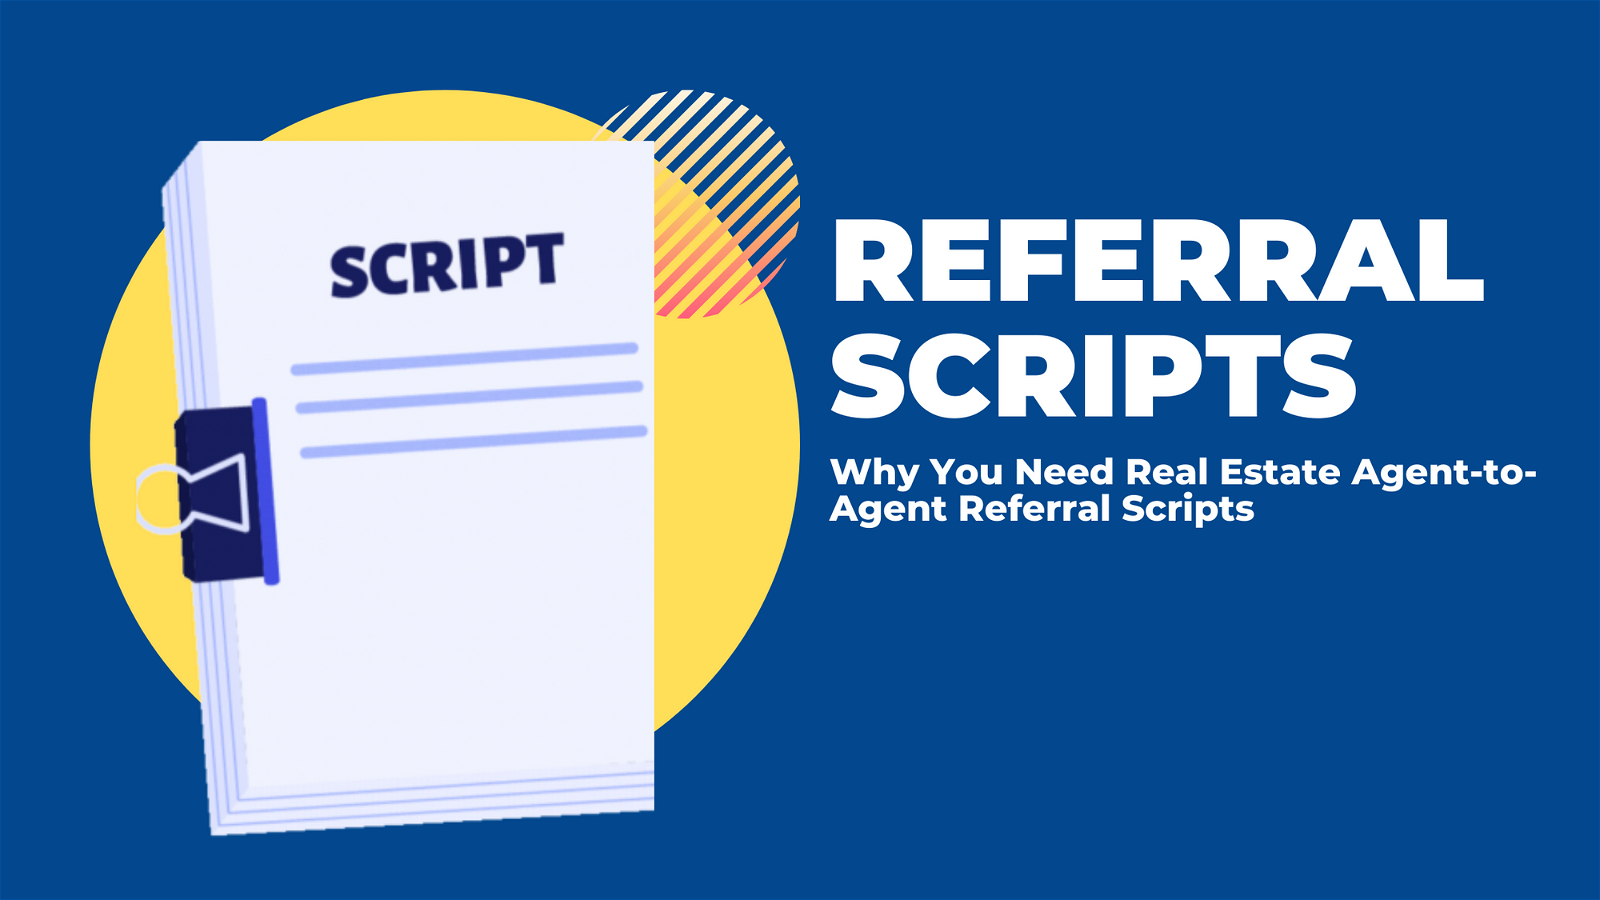 Here’s Why You Need a Real Estate Agent-to-Agent Referral Script